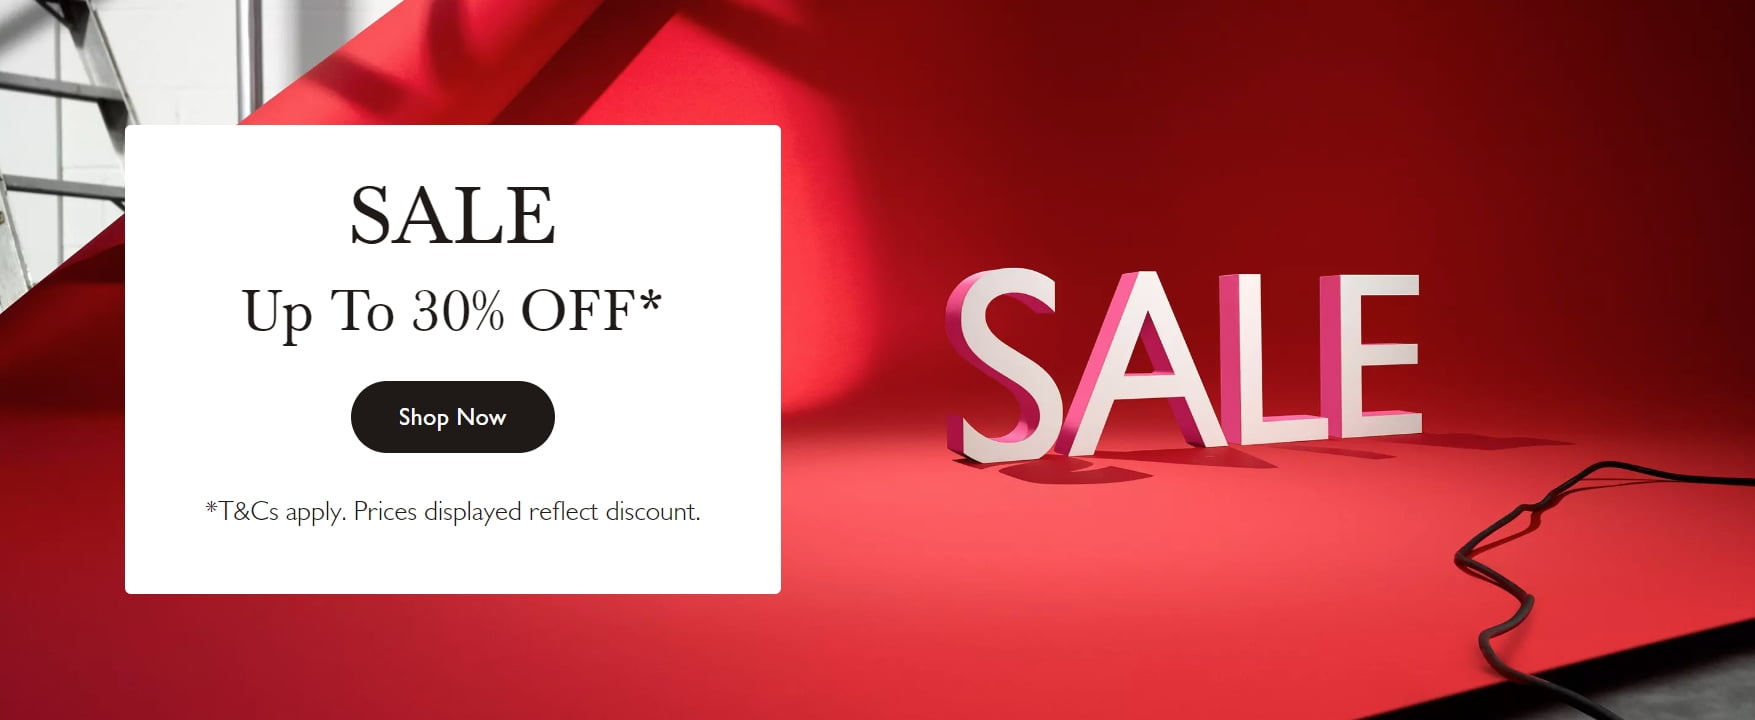 Winter Sale at Molton Brown: Up to 30% off